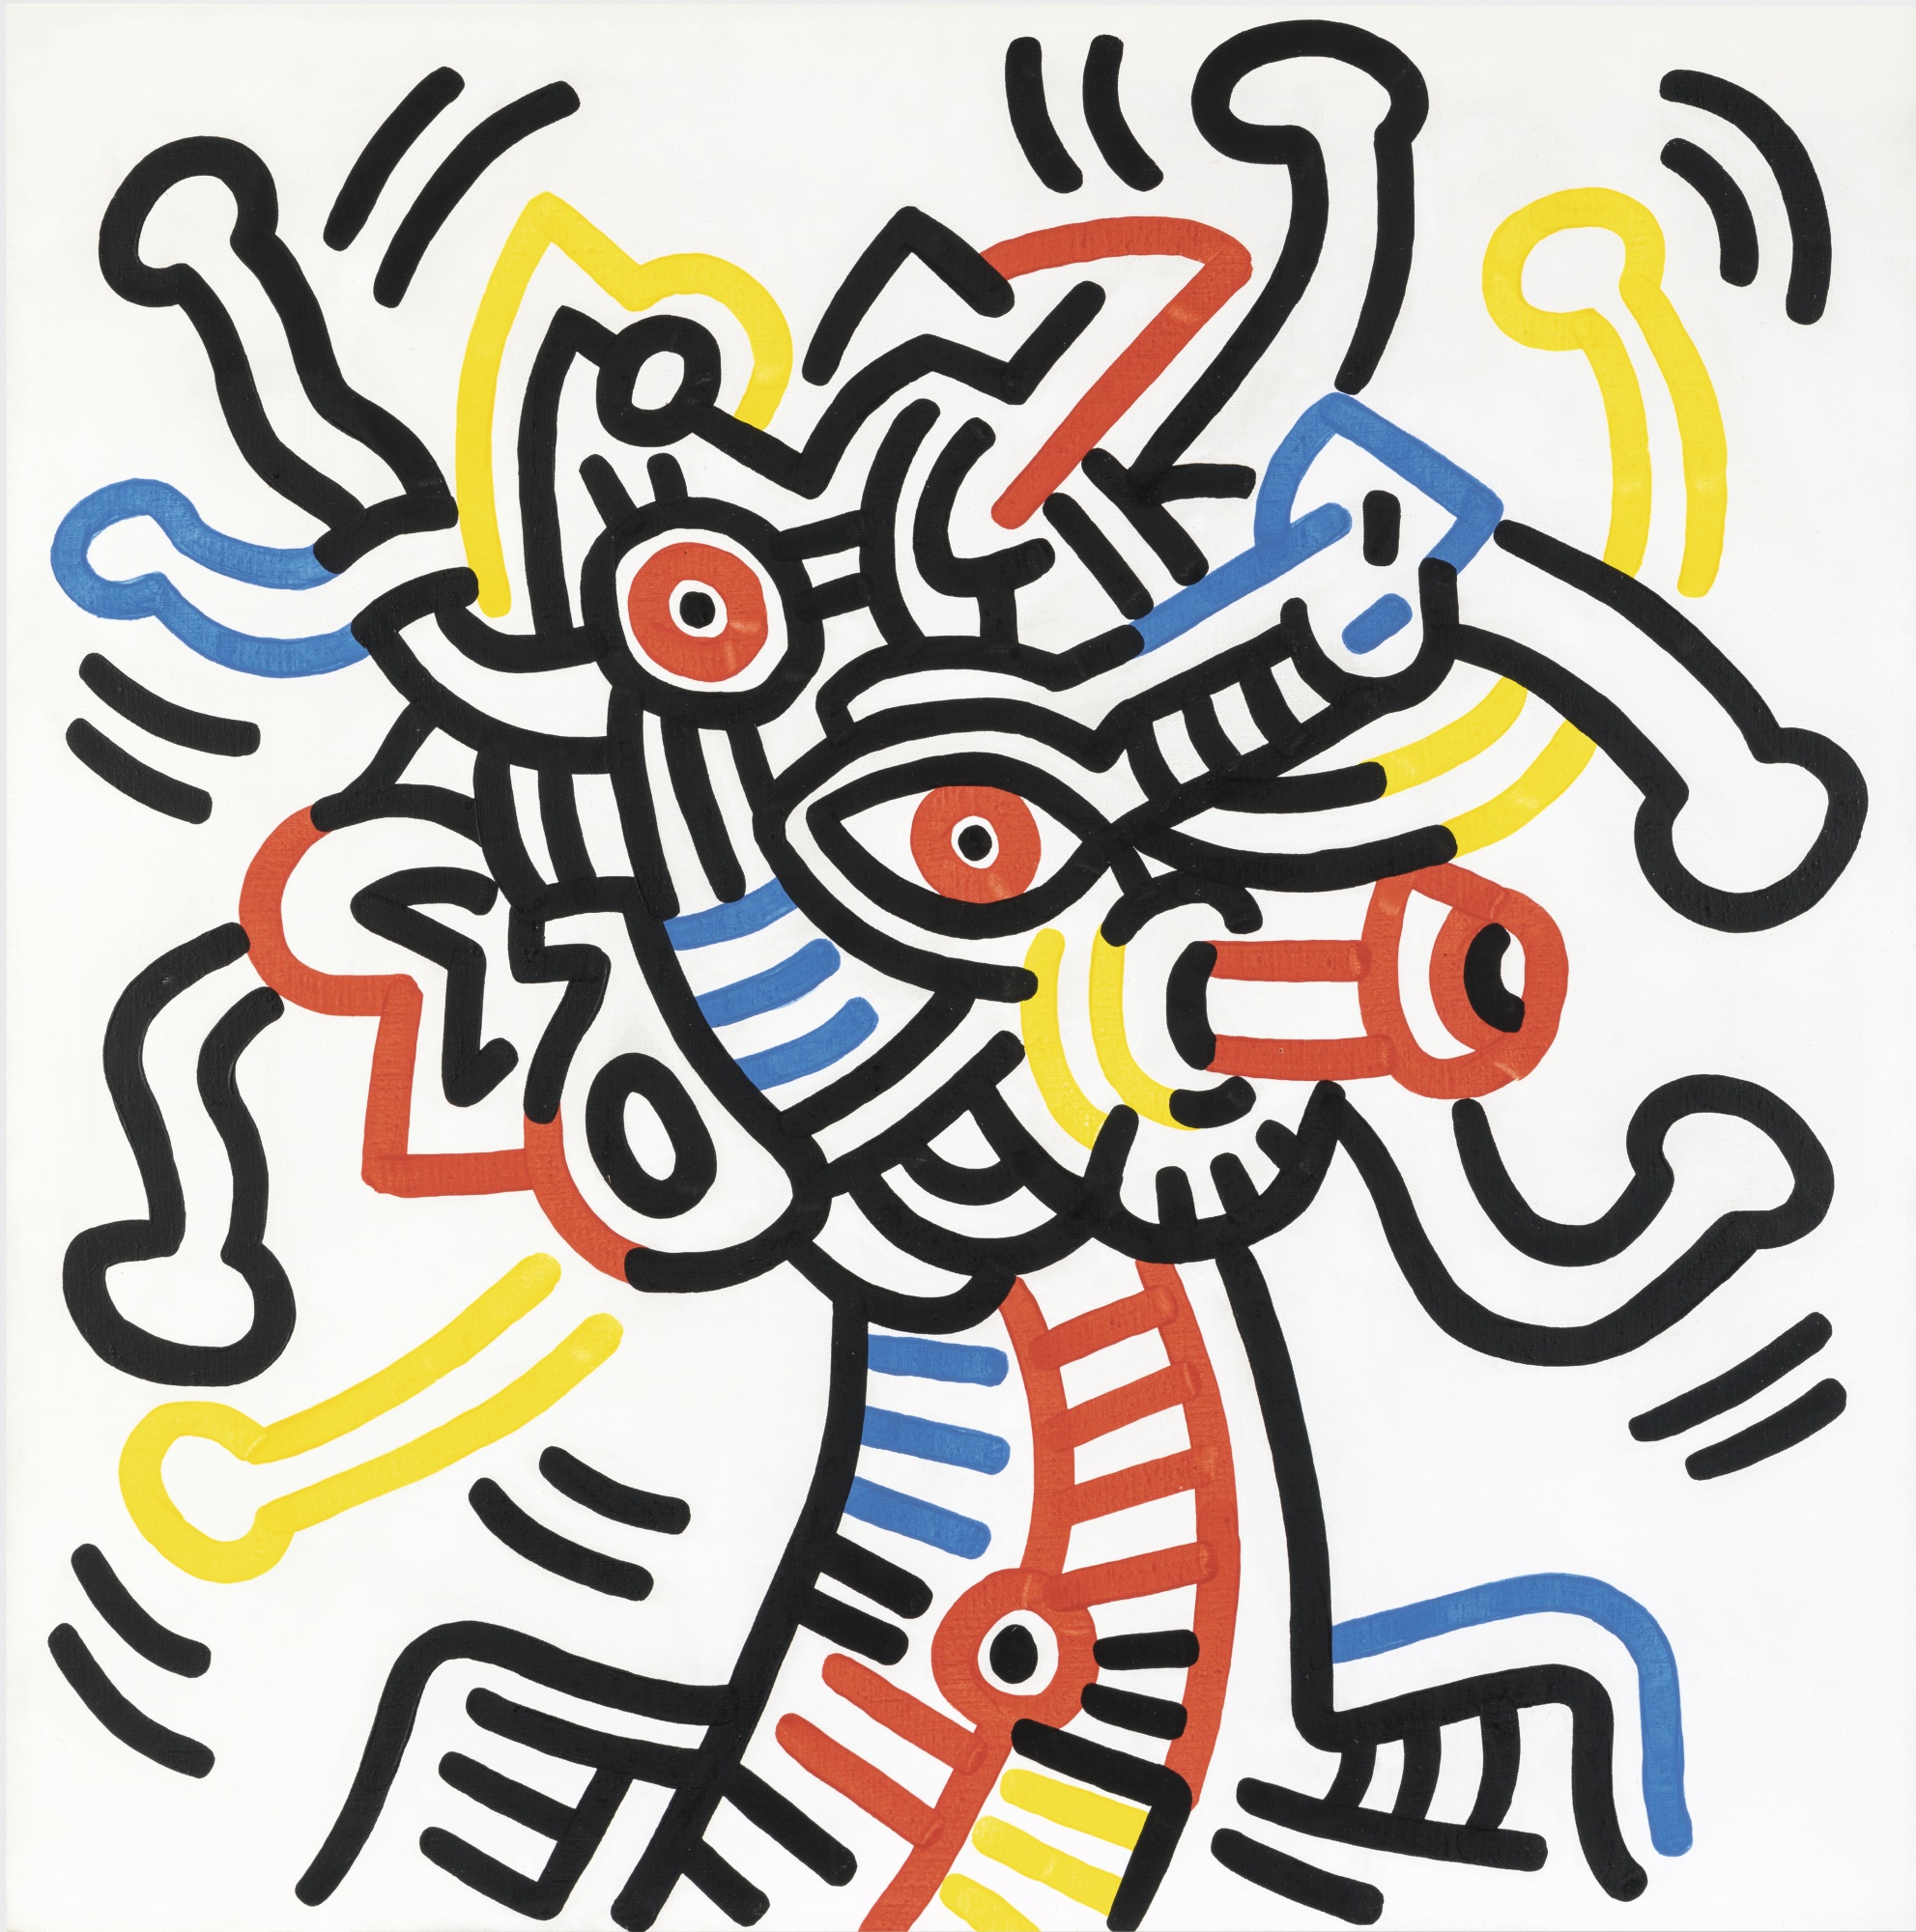 LOT 43 KEITH HARING UNTITLED Estimate 800,000 - 1,200,000 GBP unsold.